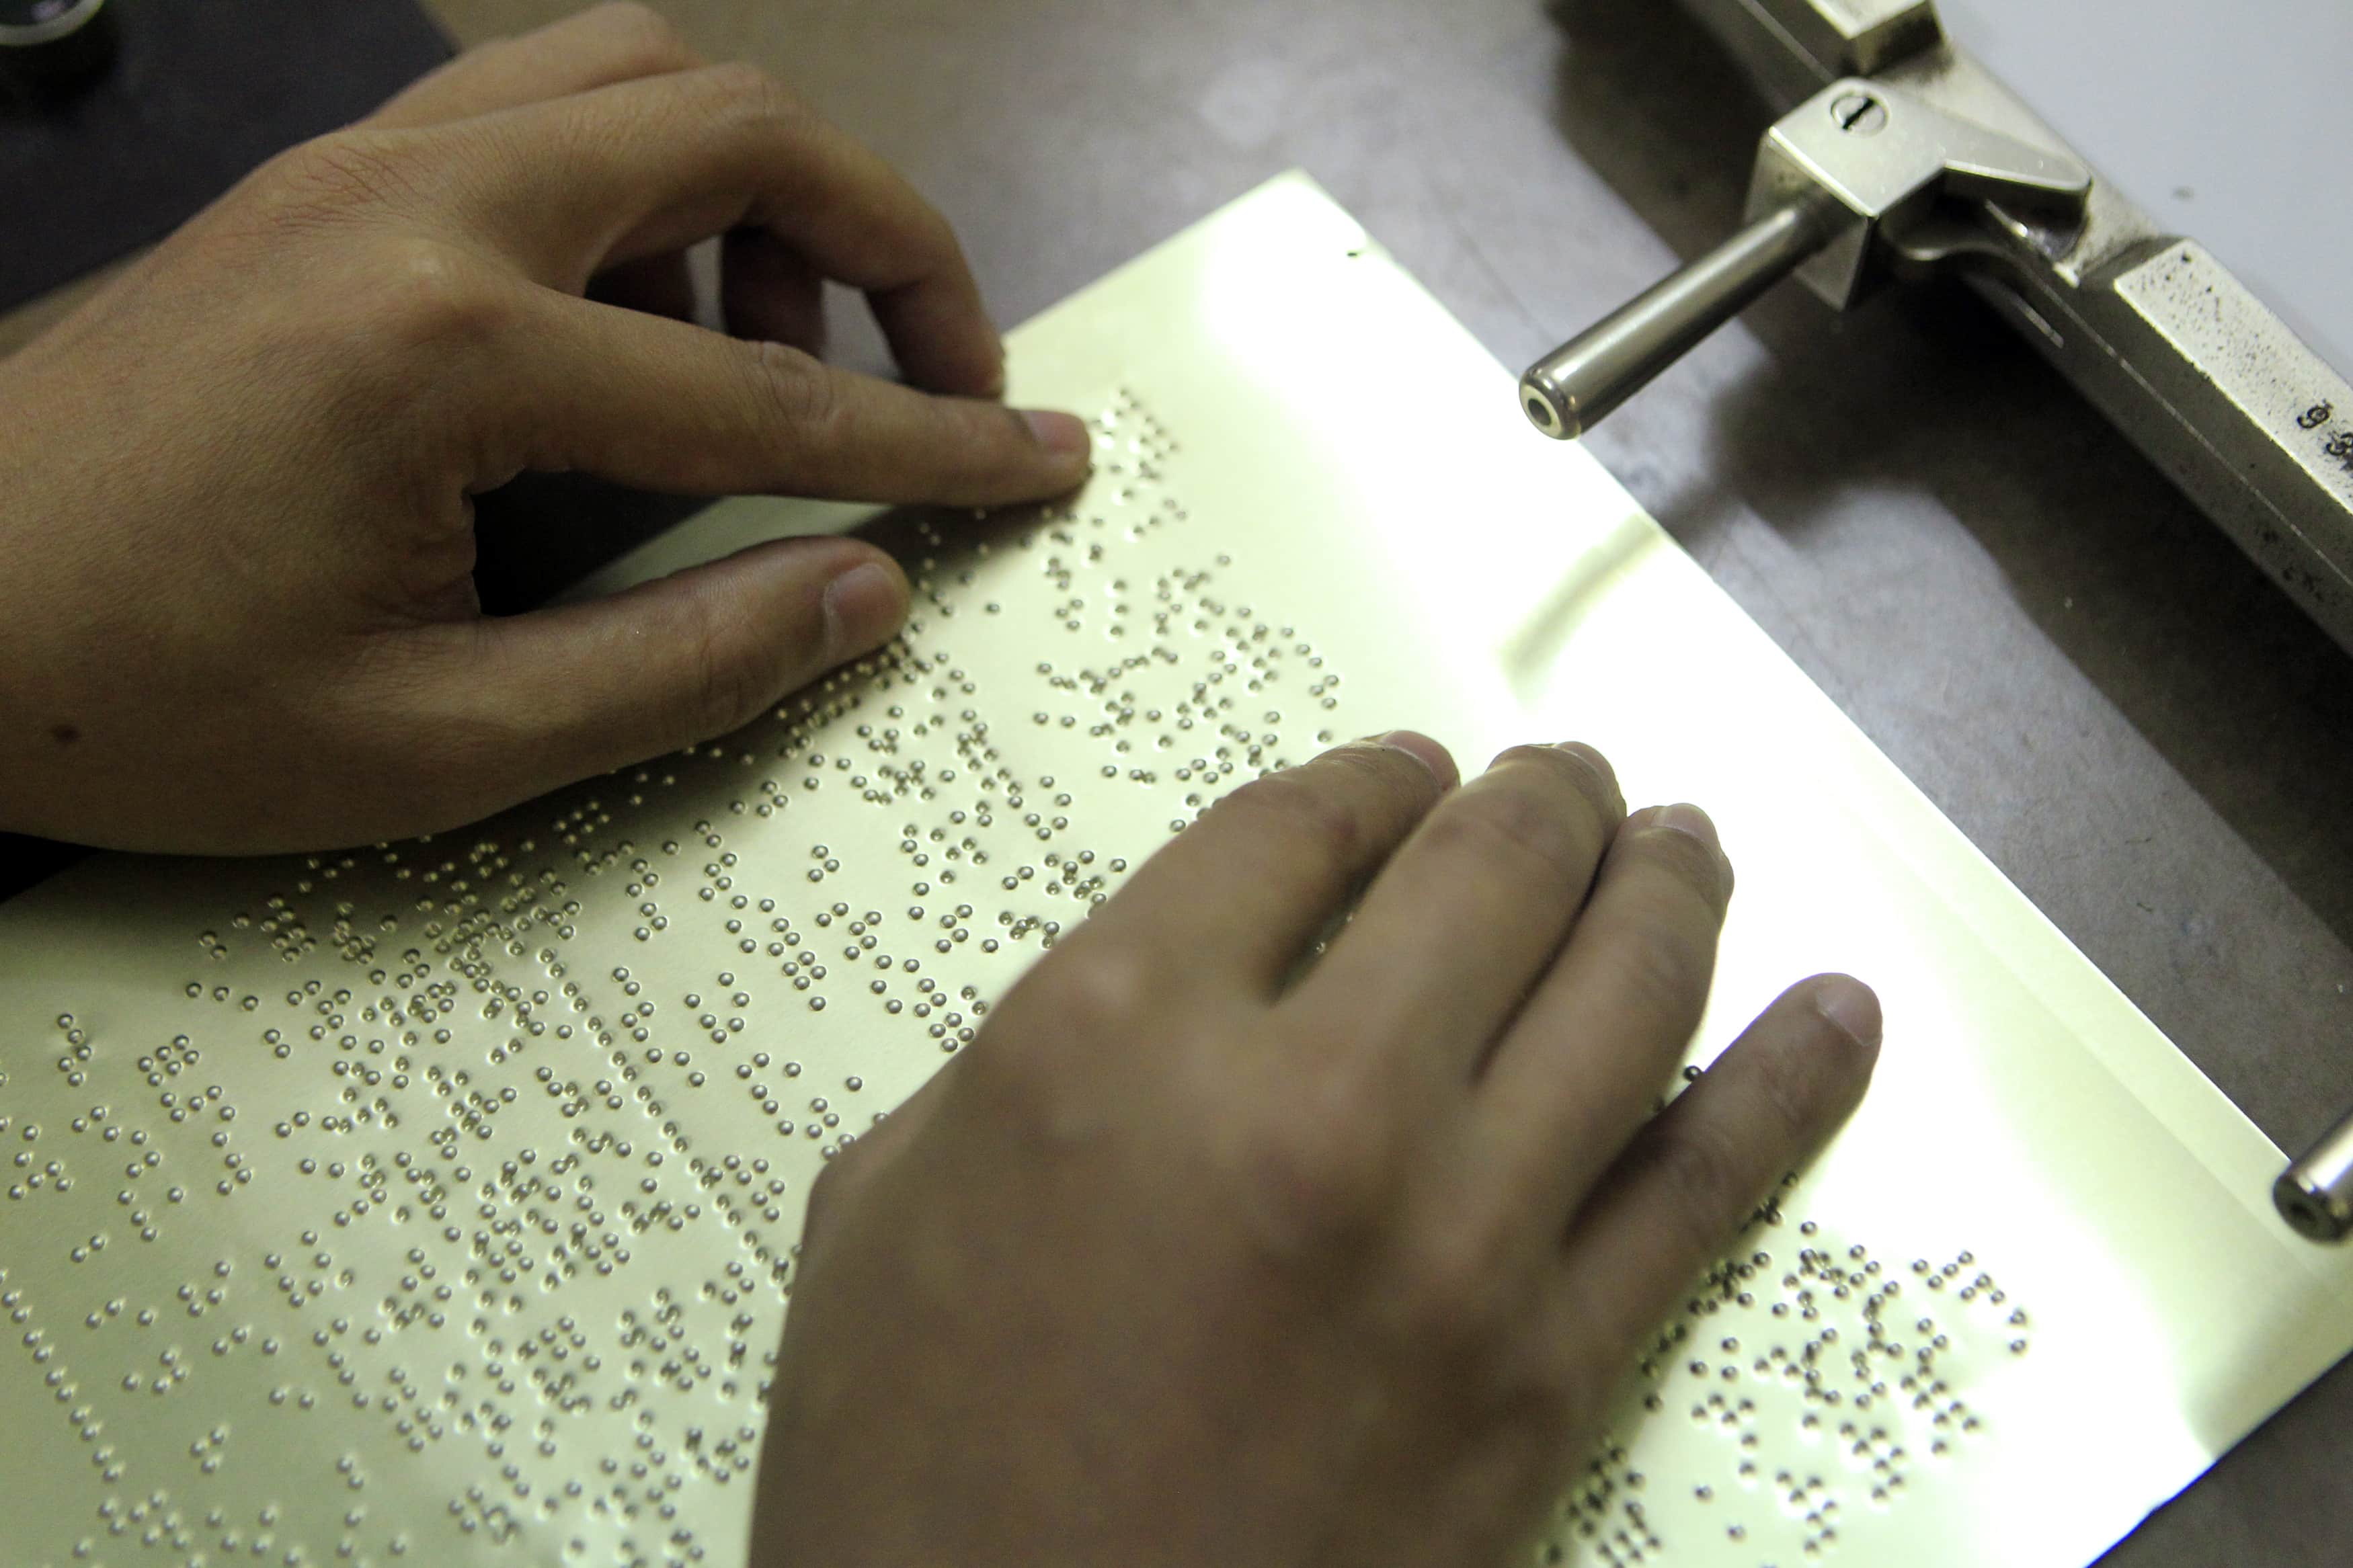 Checking a PhamChecking a Braille press plate for a magazine for the blind in magazine in Hanoi, Vietnam, October 2014, REUTERS/Kham